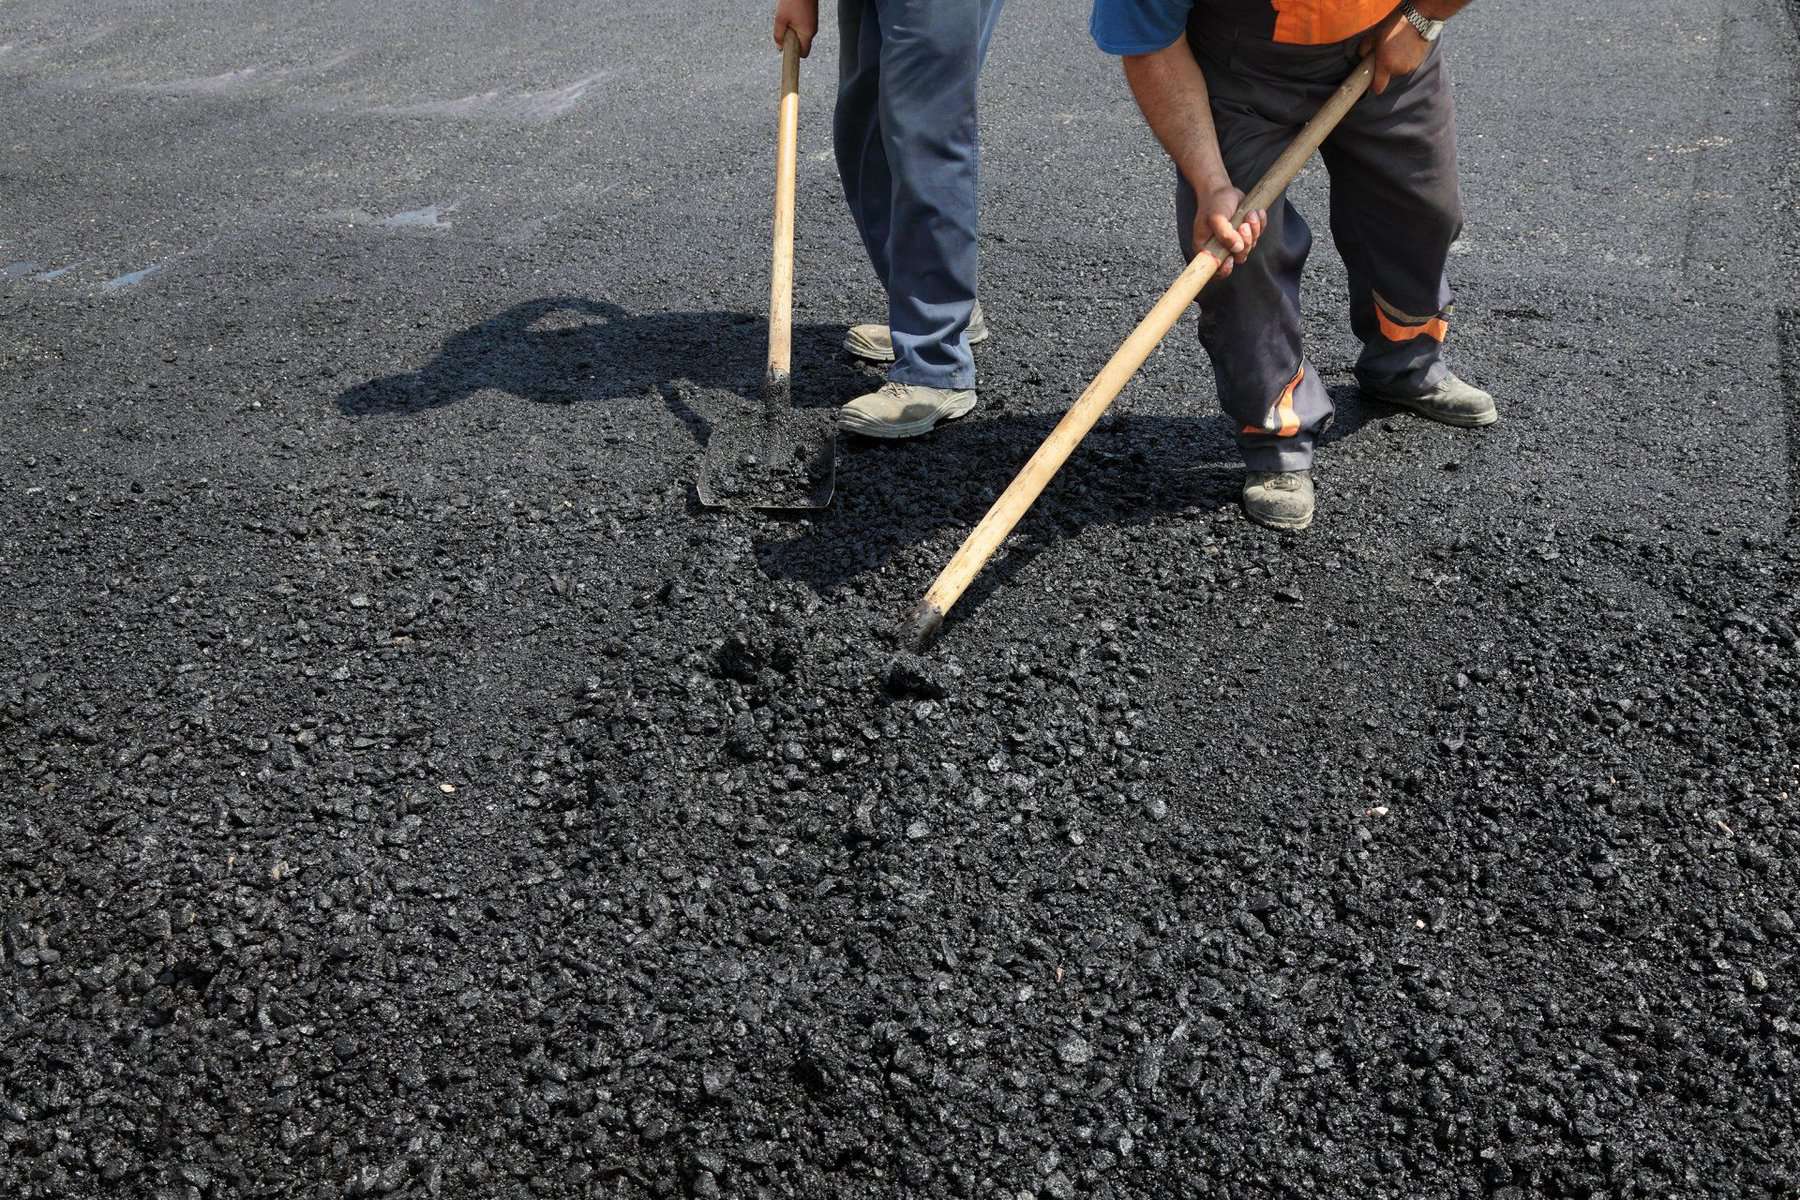 A hot asphalt mix is placed to repair the damaged parking lot.